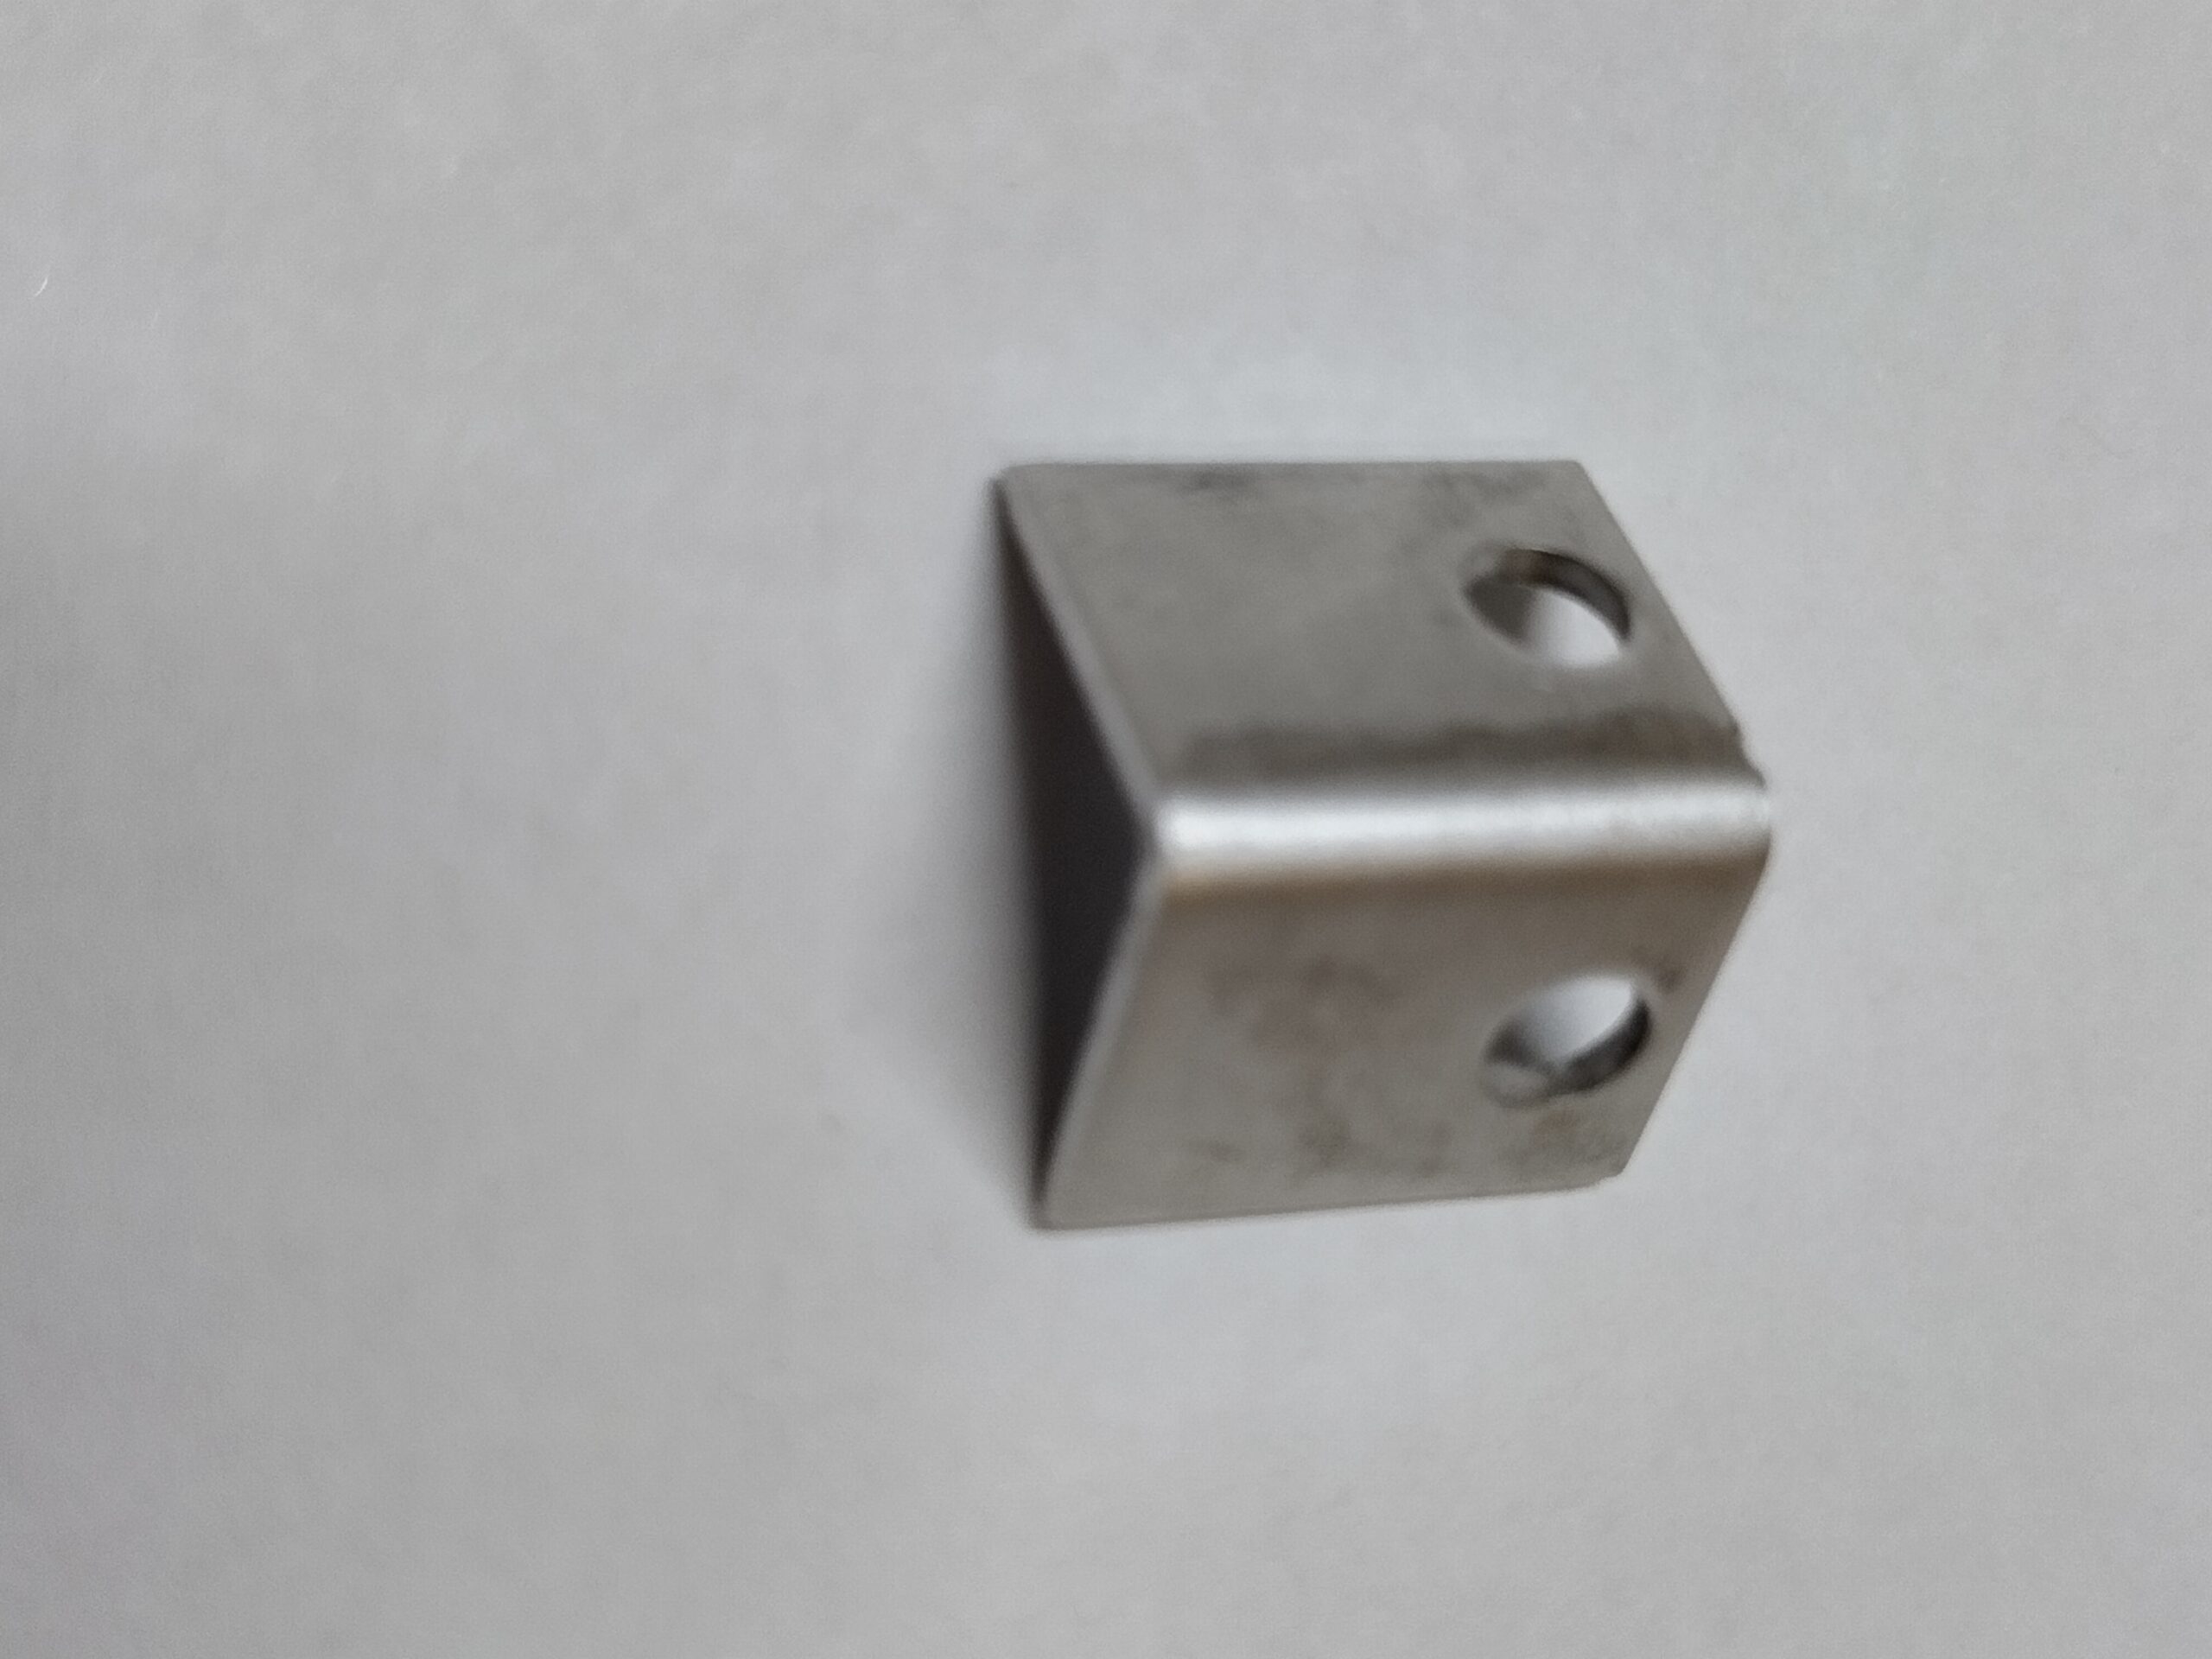 Small bracket with holes